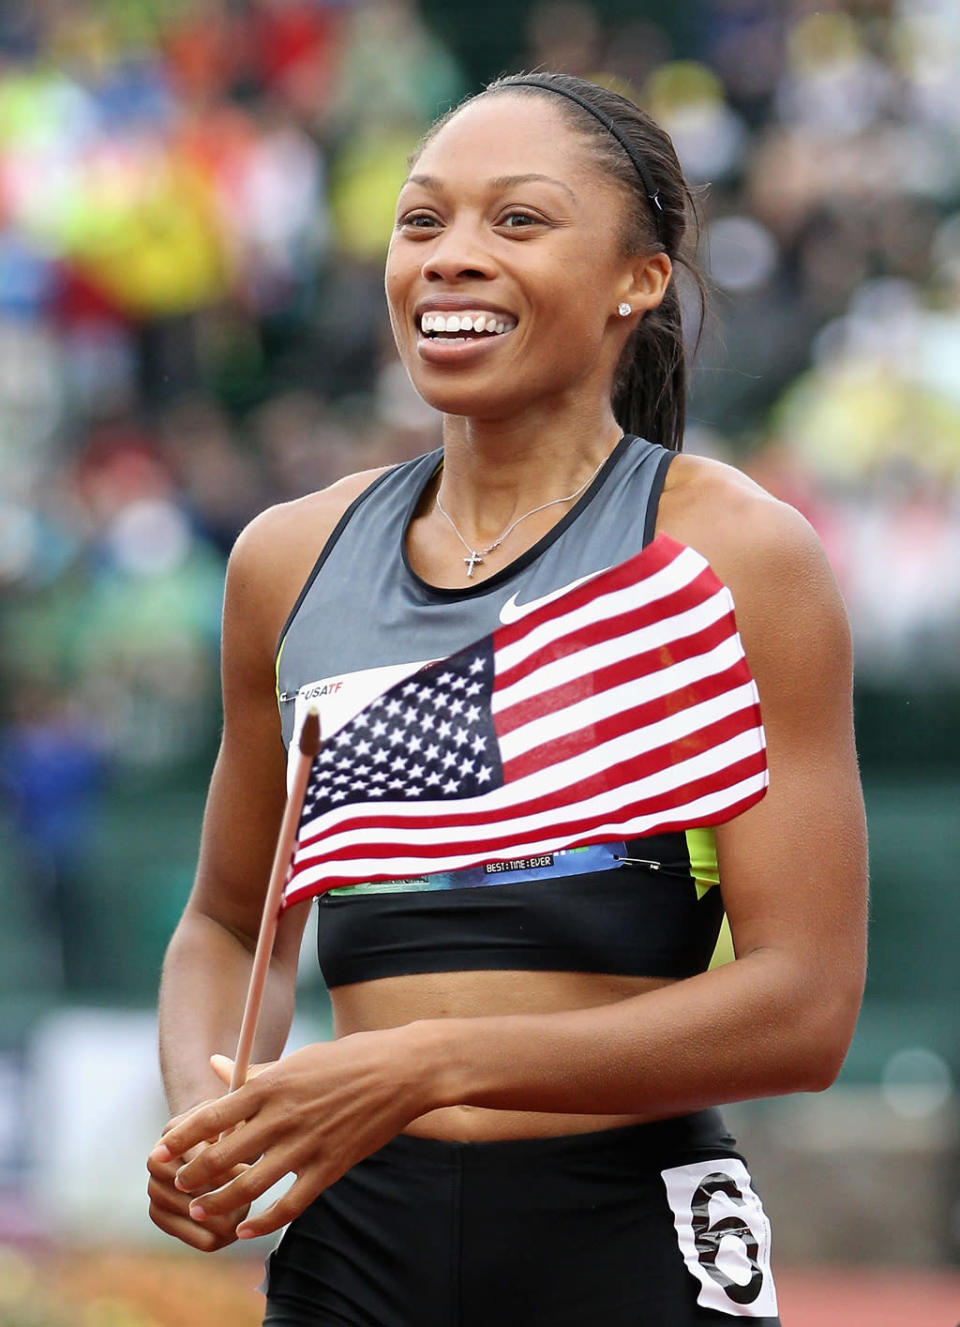 <b>Allyson Felix</b><br> Team USA’s Allyson Felix is the only woman to be a three-time Athletics World Championship gold medalist. She was nicknamed “Chicken Legs” in high school, but her now perfectly built muscular body is far from that. (Photo by Christian Petersen/Getty Images)